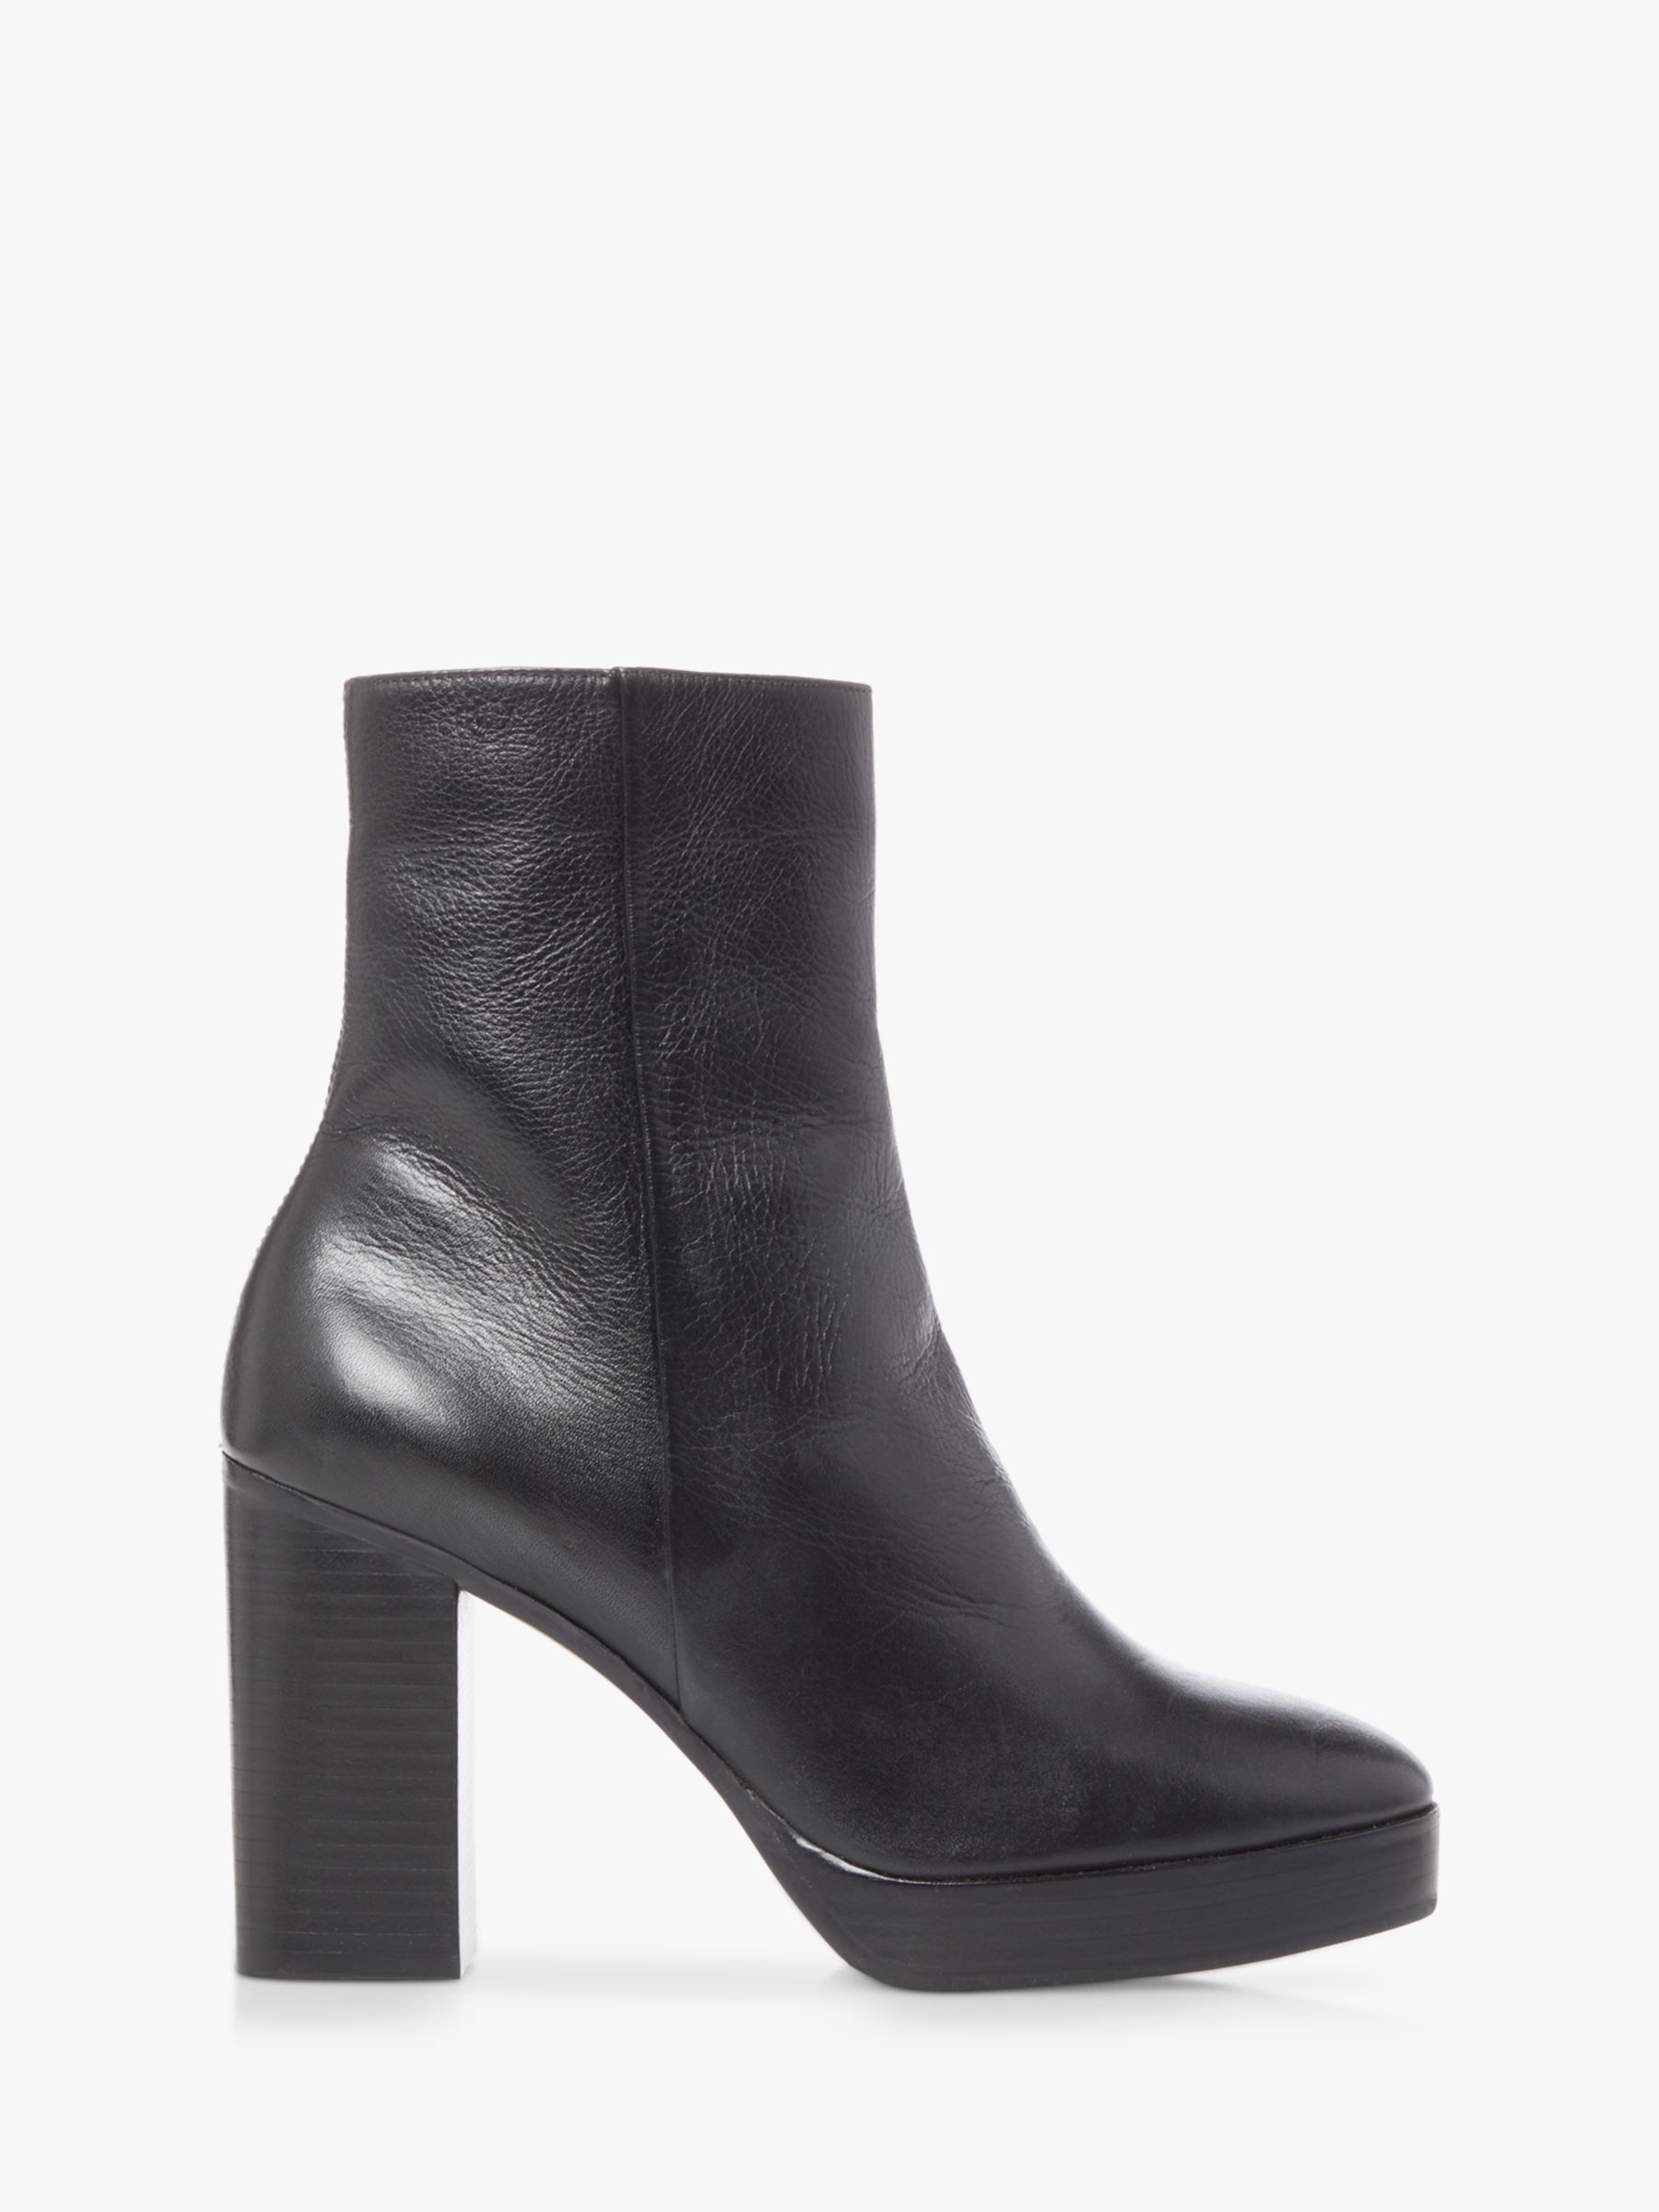 Dune Pella Leather Ankle Boots, Black at John Lewis & Partners